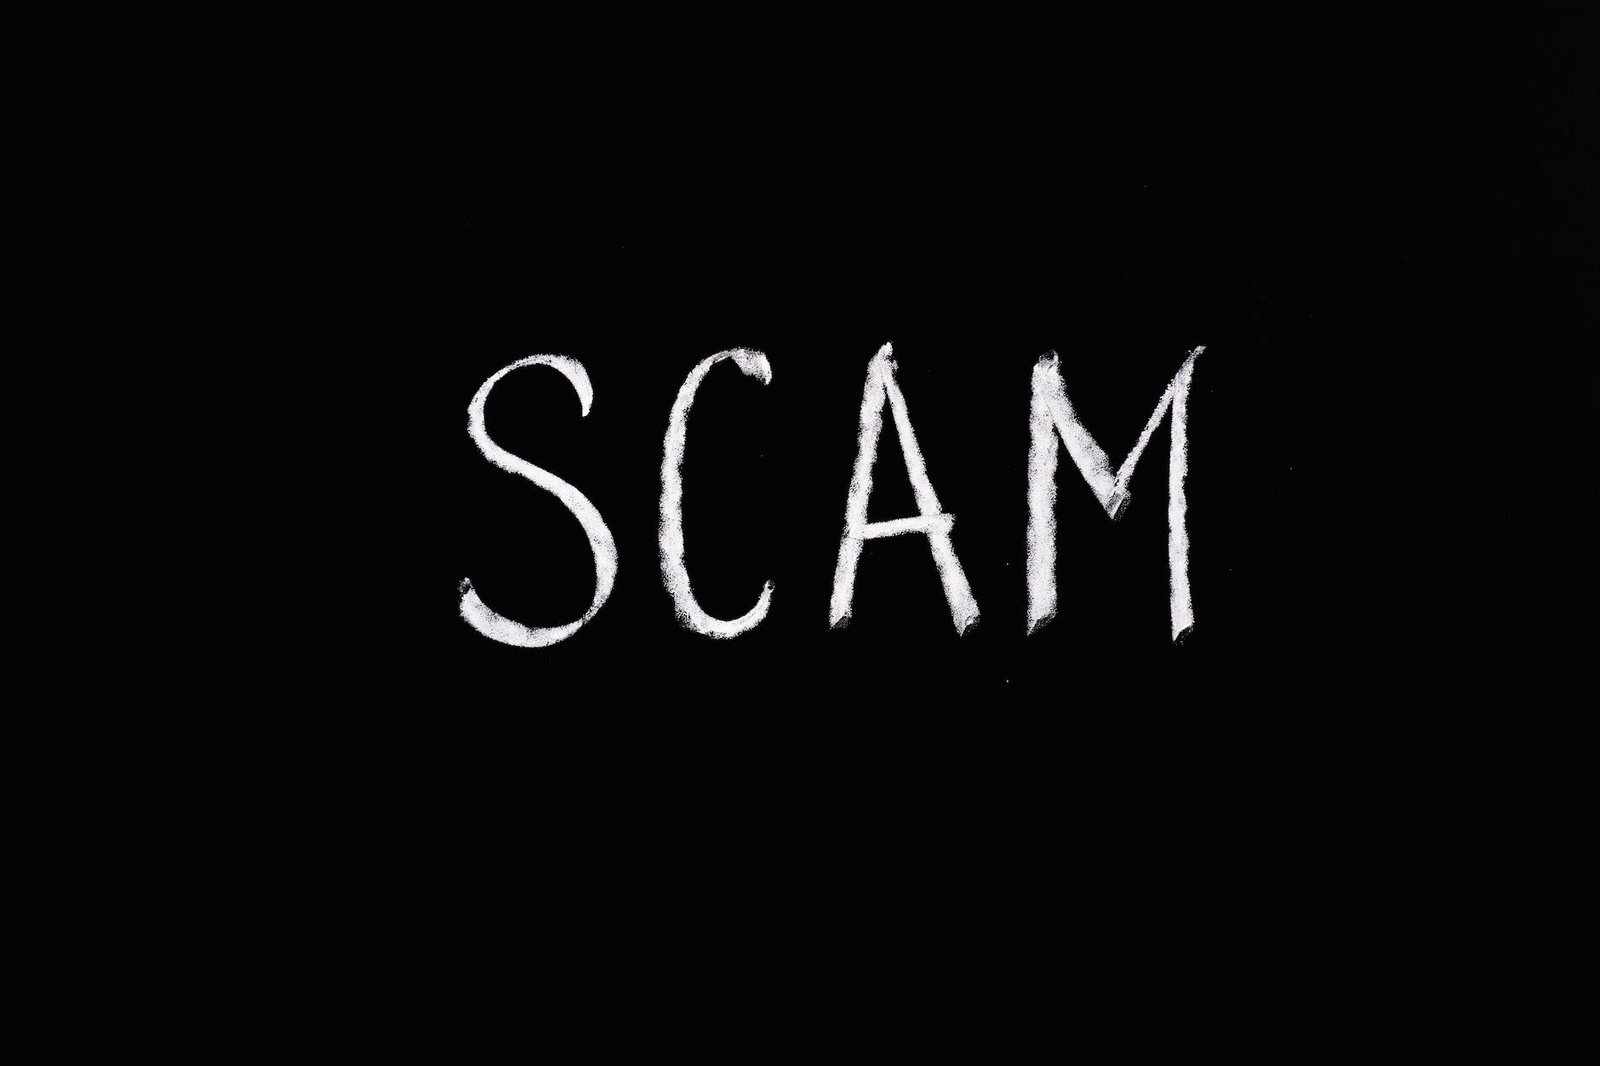 scam lettering text on black background